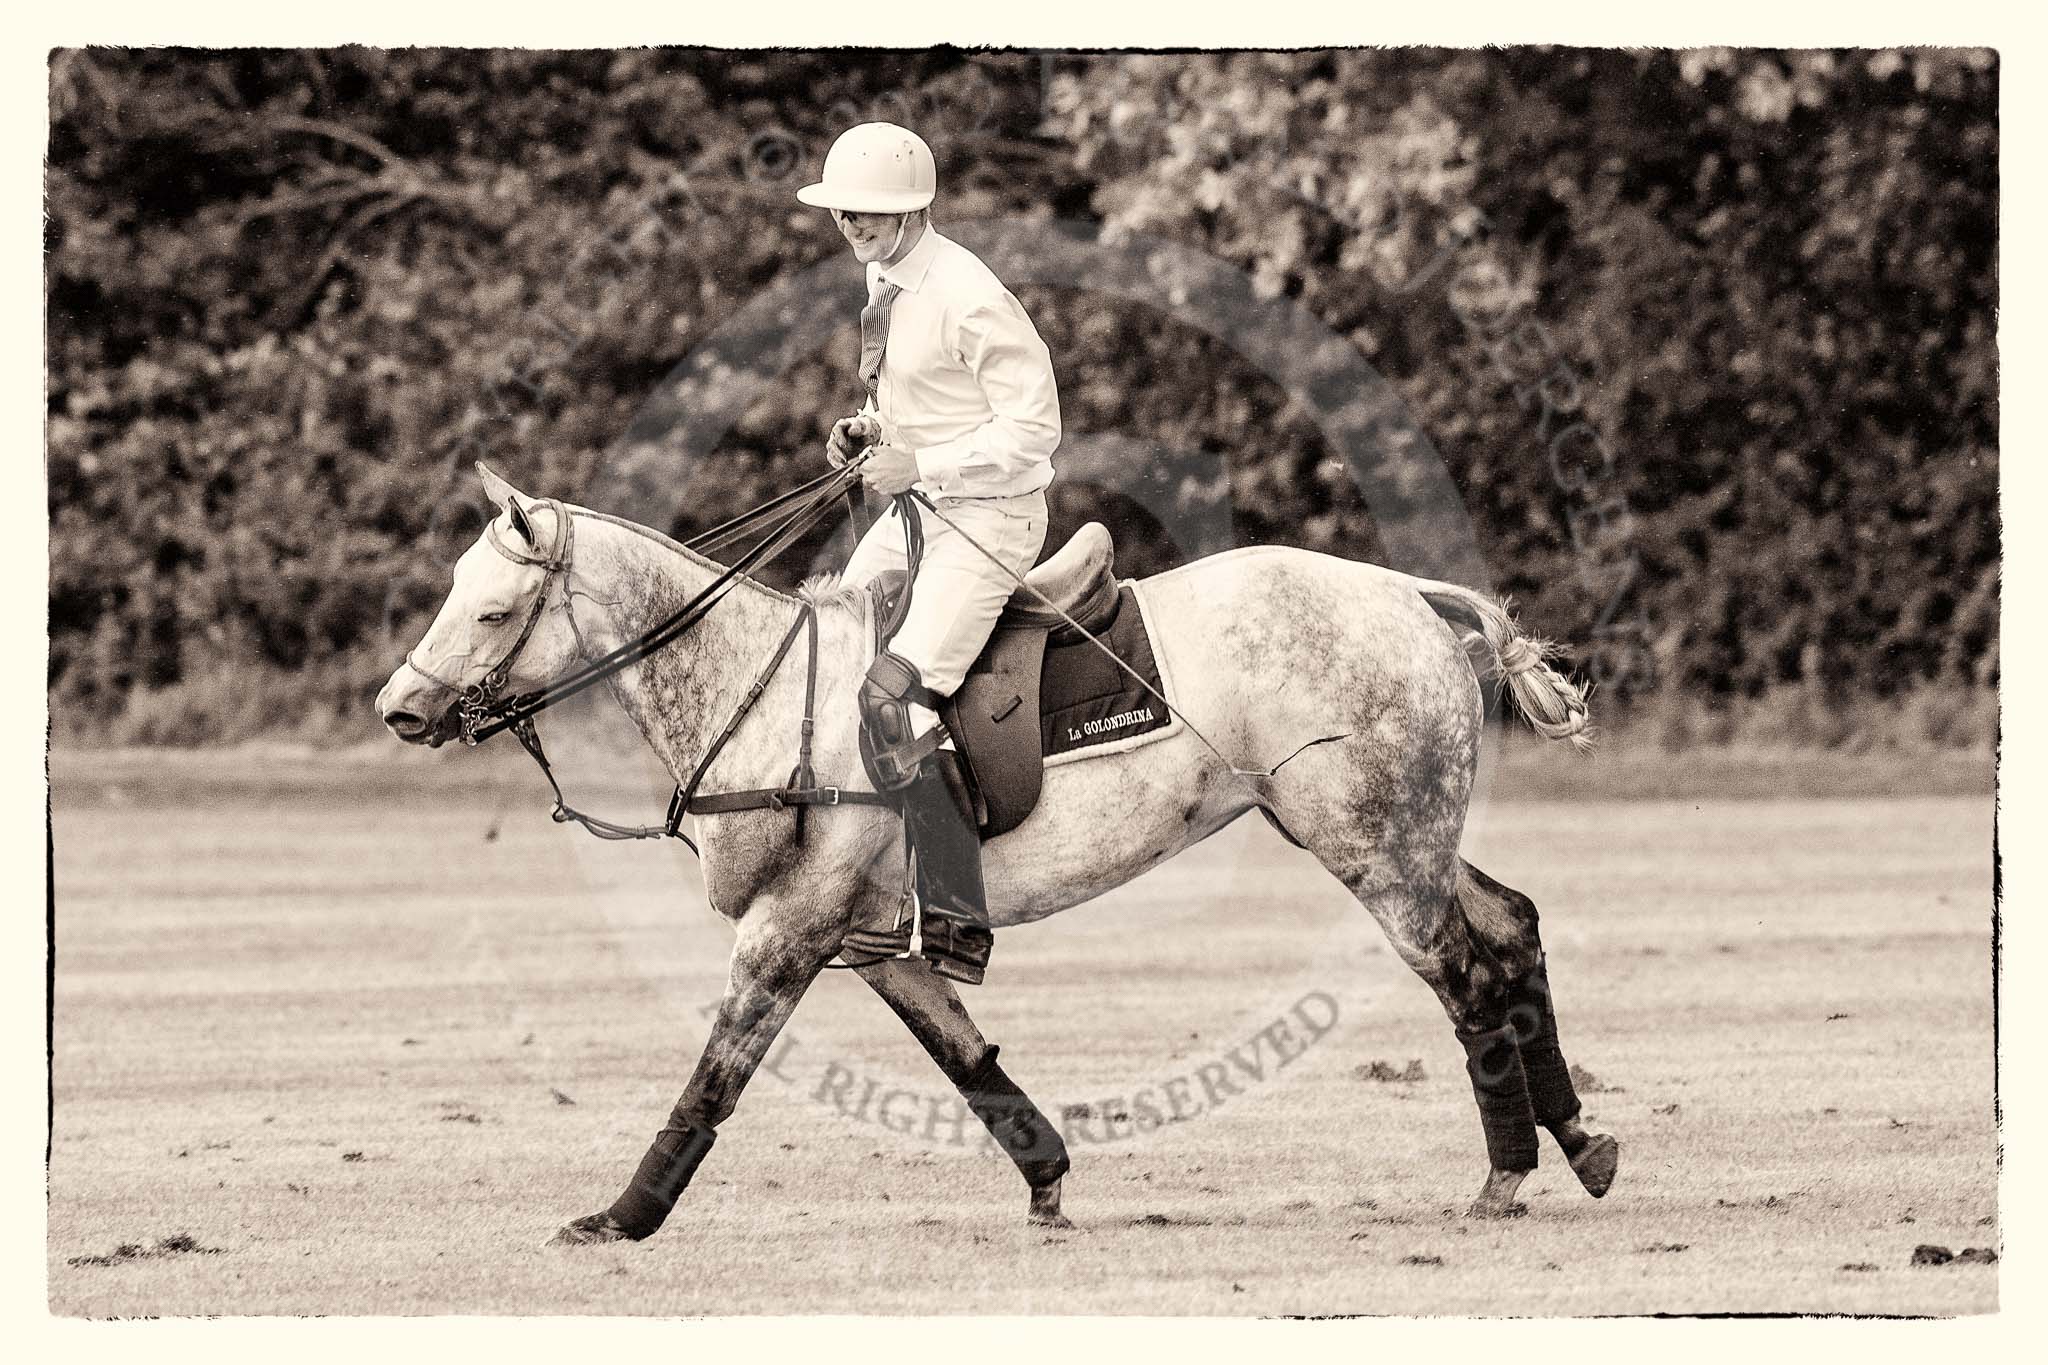 7th Heritage Polo Cup semi-finals: La Golondrina Argentina Pedro Harrison turning his mare back to play..
Hurtwood Park Polo Club,
Ewhurst Green,
Surrey,
United Kingdom,
on 04 August 2012 at 15:47, image #281